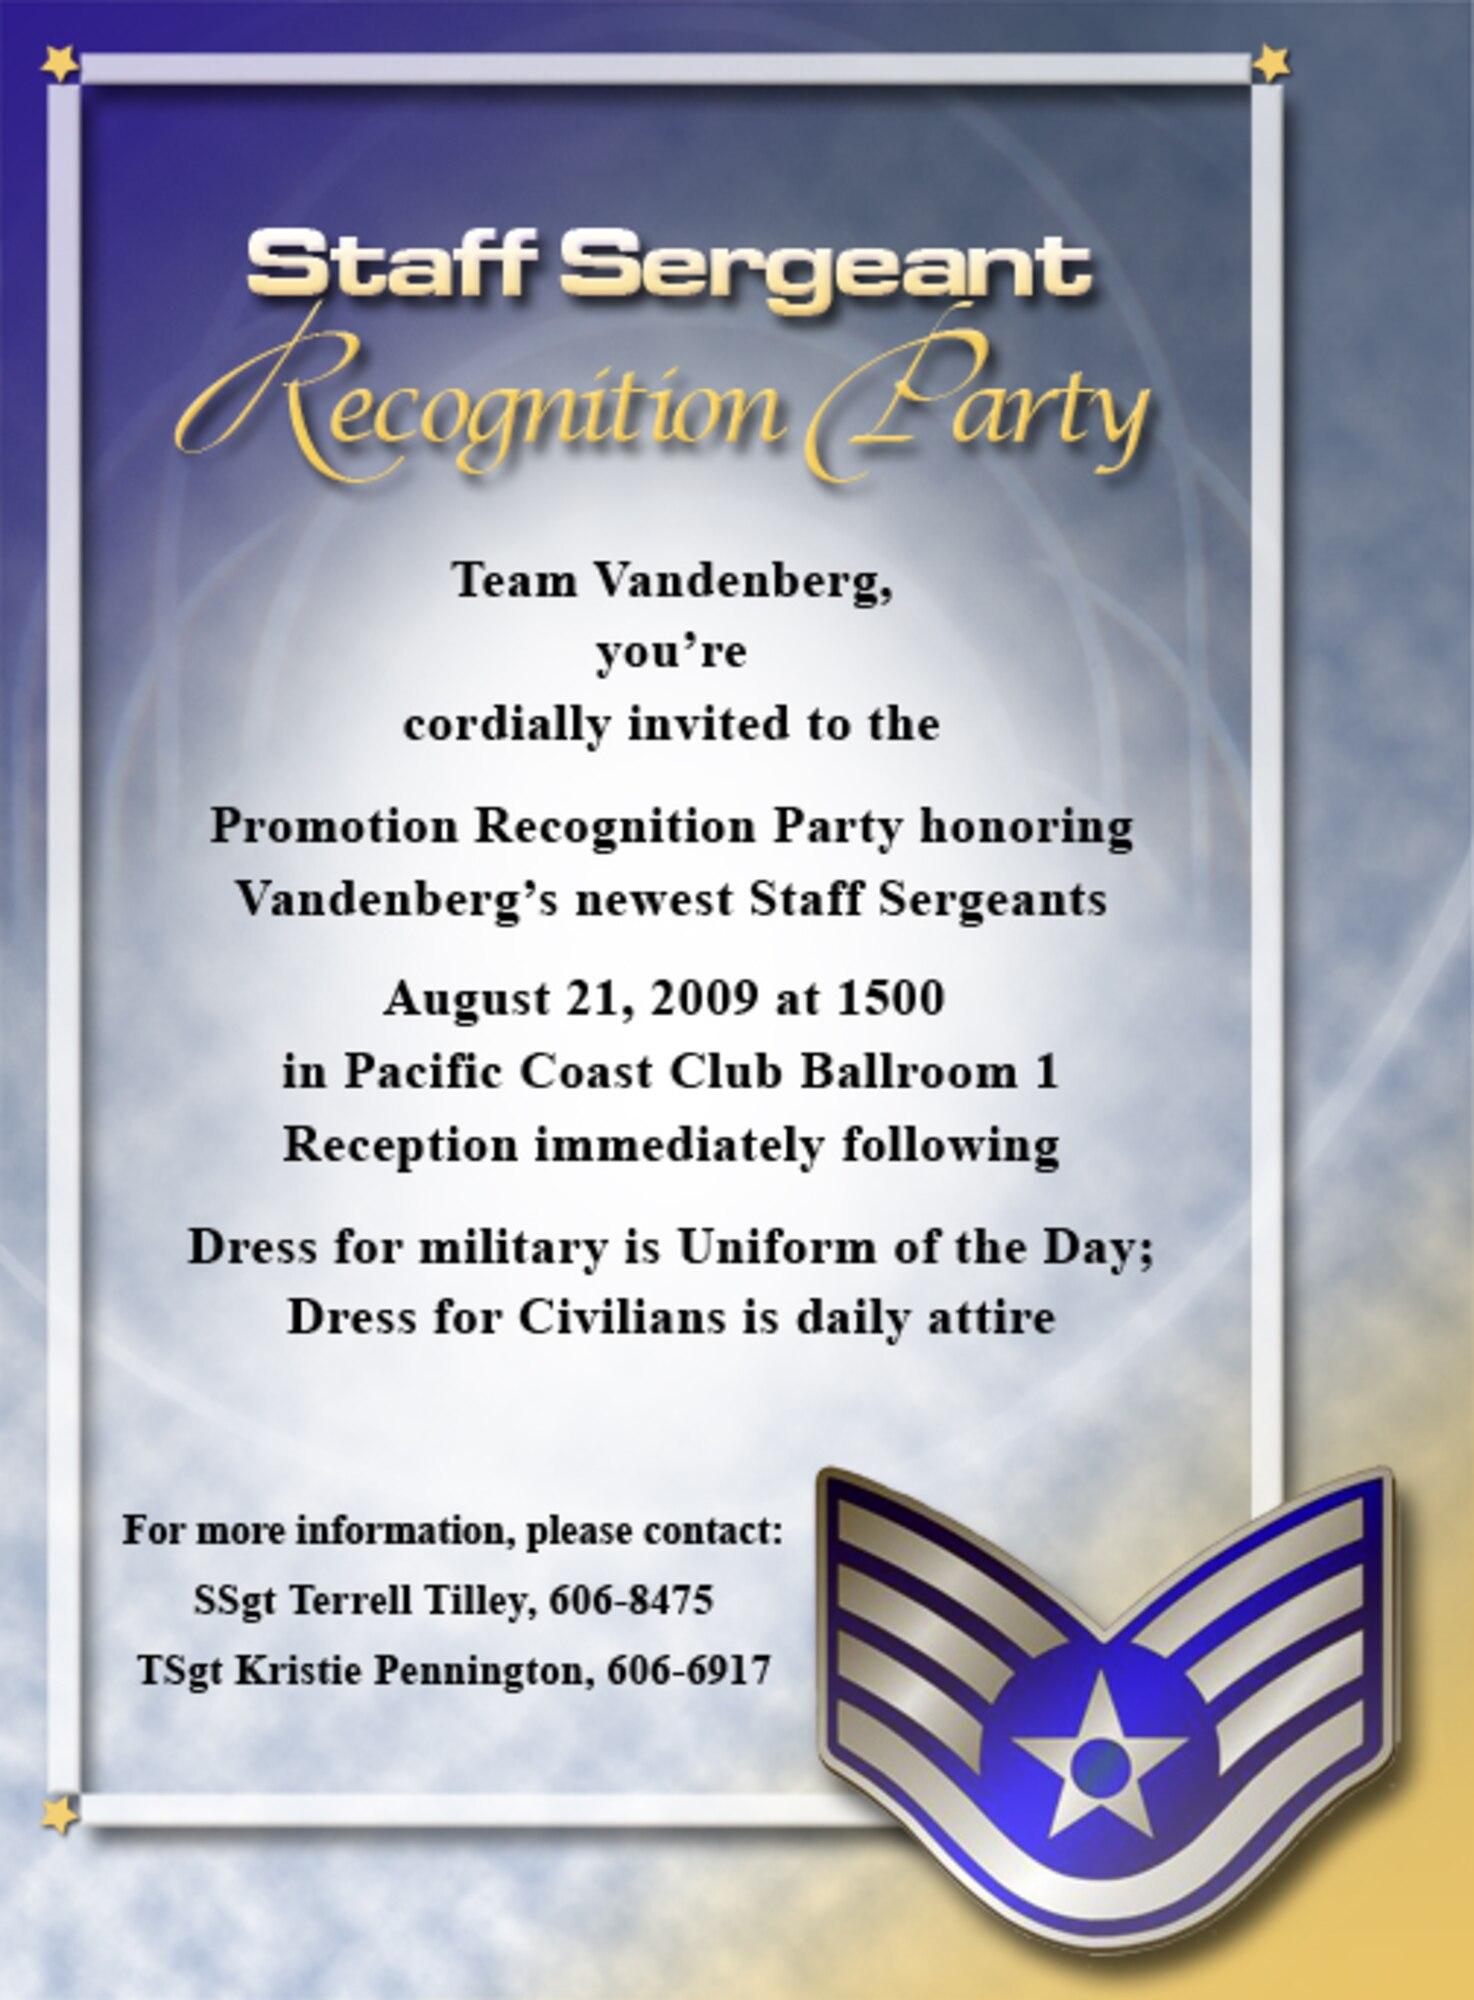 VANDENBERG AIR FORCE BASE, Calif. -- The Vandenberg Enlisted Action Team will hold a recognition party for the base's new staff sergeant selects. (U.S. Air Force graphic)